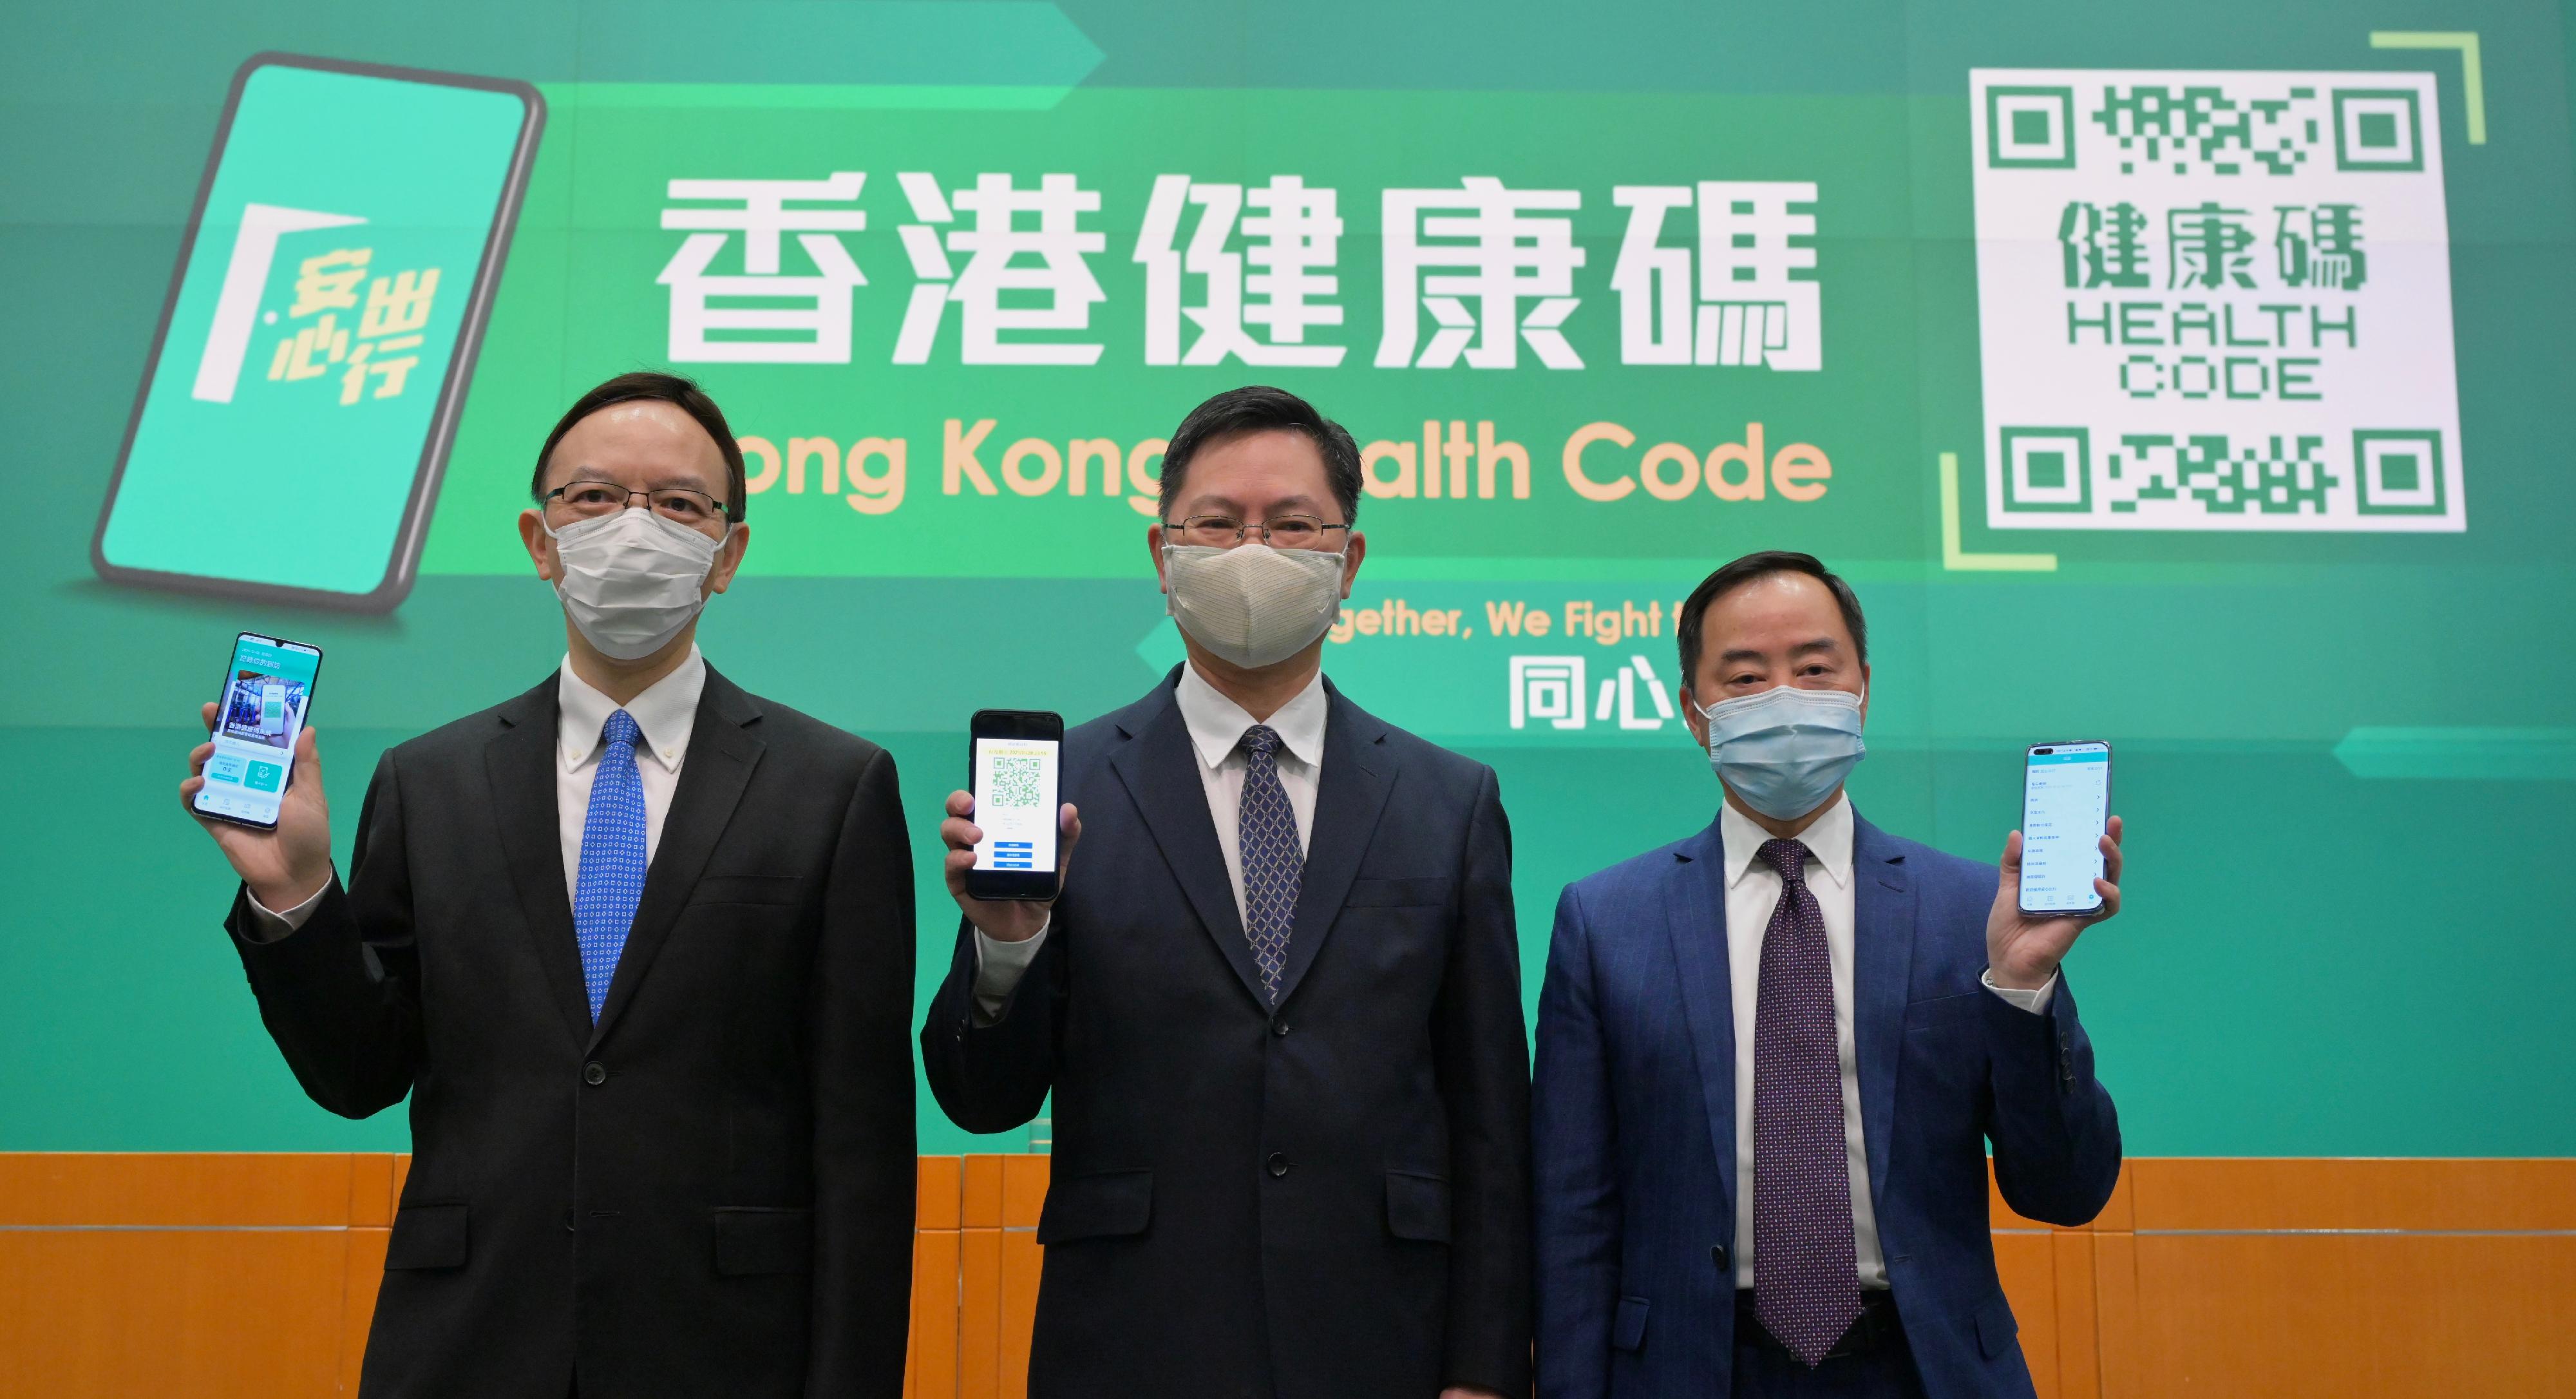 The Secretary for Innovation and Technology, Mr Alfred Sit, together with the Government Chief Information Officer, Mr Victor Lam, and the Deputy Government Chief Information Officer, Mr Tony Wong, held a press conference to announce details of the Hong Kong Health Code today (December 2). Photo shows Mr Sit (centre), Mr Lam (left) and Mr Wong (right) displaying the Hong Kong Health Code and the "LeaveHomeSafe" mobile app 3.0 version.